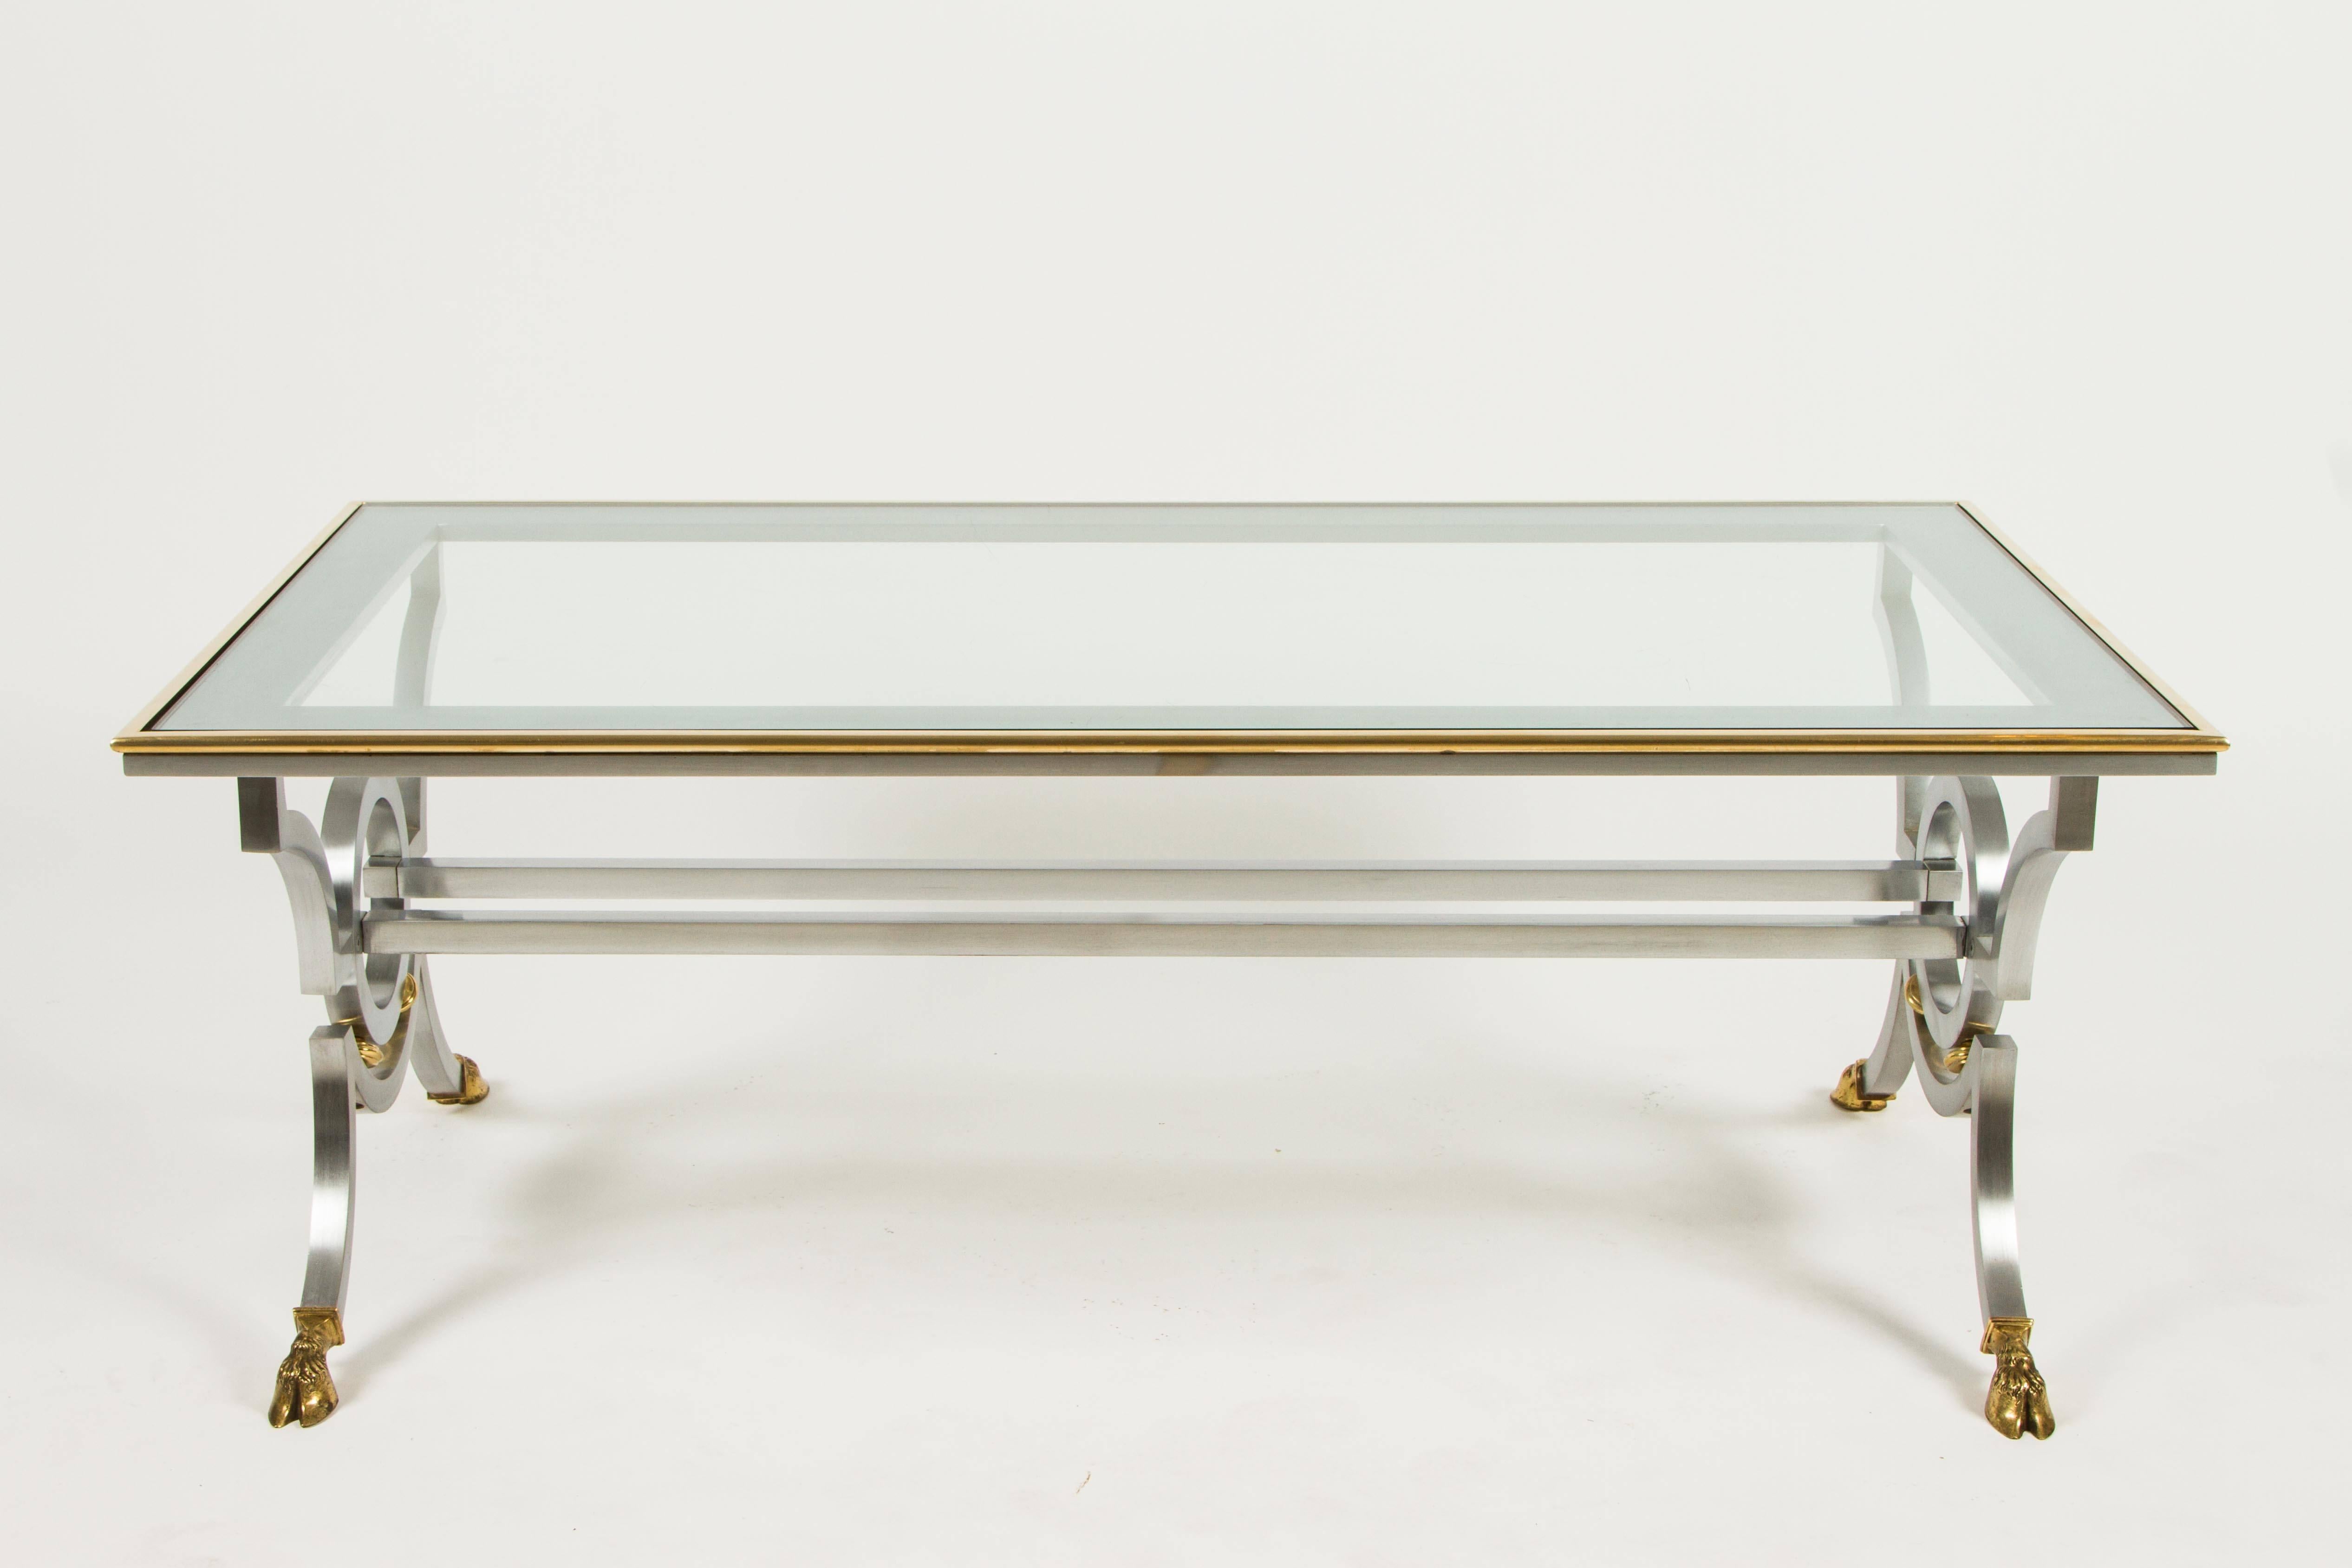 This stylish table features a brushed steel frame accented by brass including hove feet. The top is surrounded by a band of brass. Reminiscent of works by Maison Jansen this table is very chic.